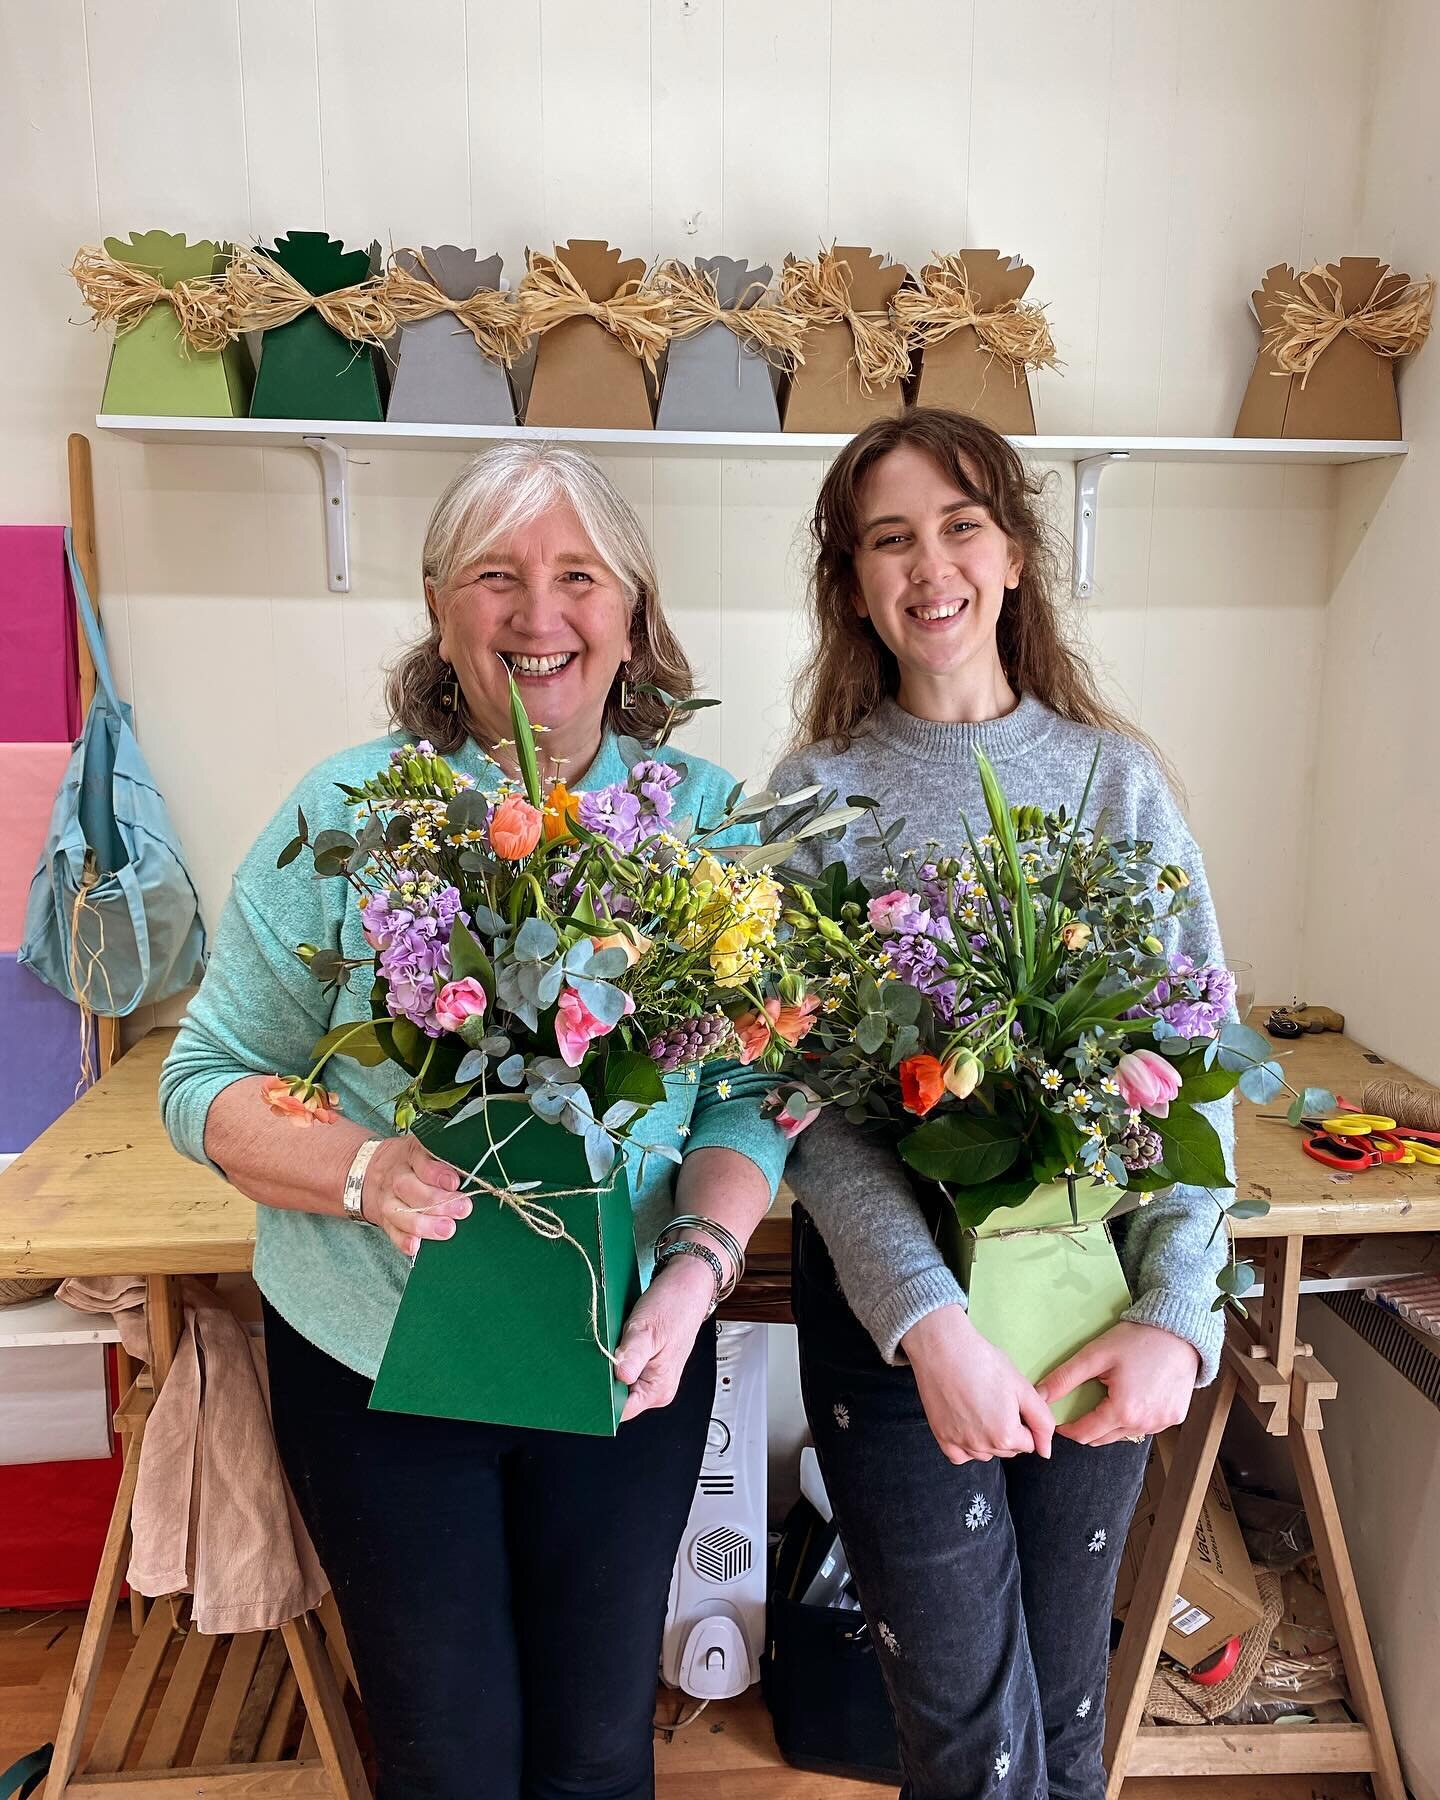 We loved hosting a spring handtied workshop at the weekend 💐 They all created beautiful handtied vase arrangements 🌸 Thank you to the lovely ladies for a great afternoon and flowering up with us 💐🌸🐣🎀